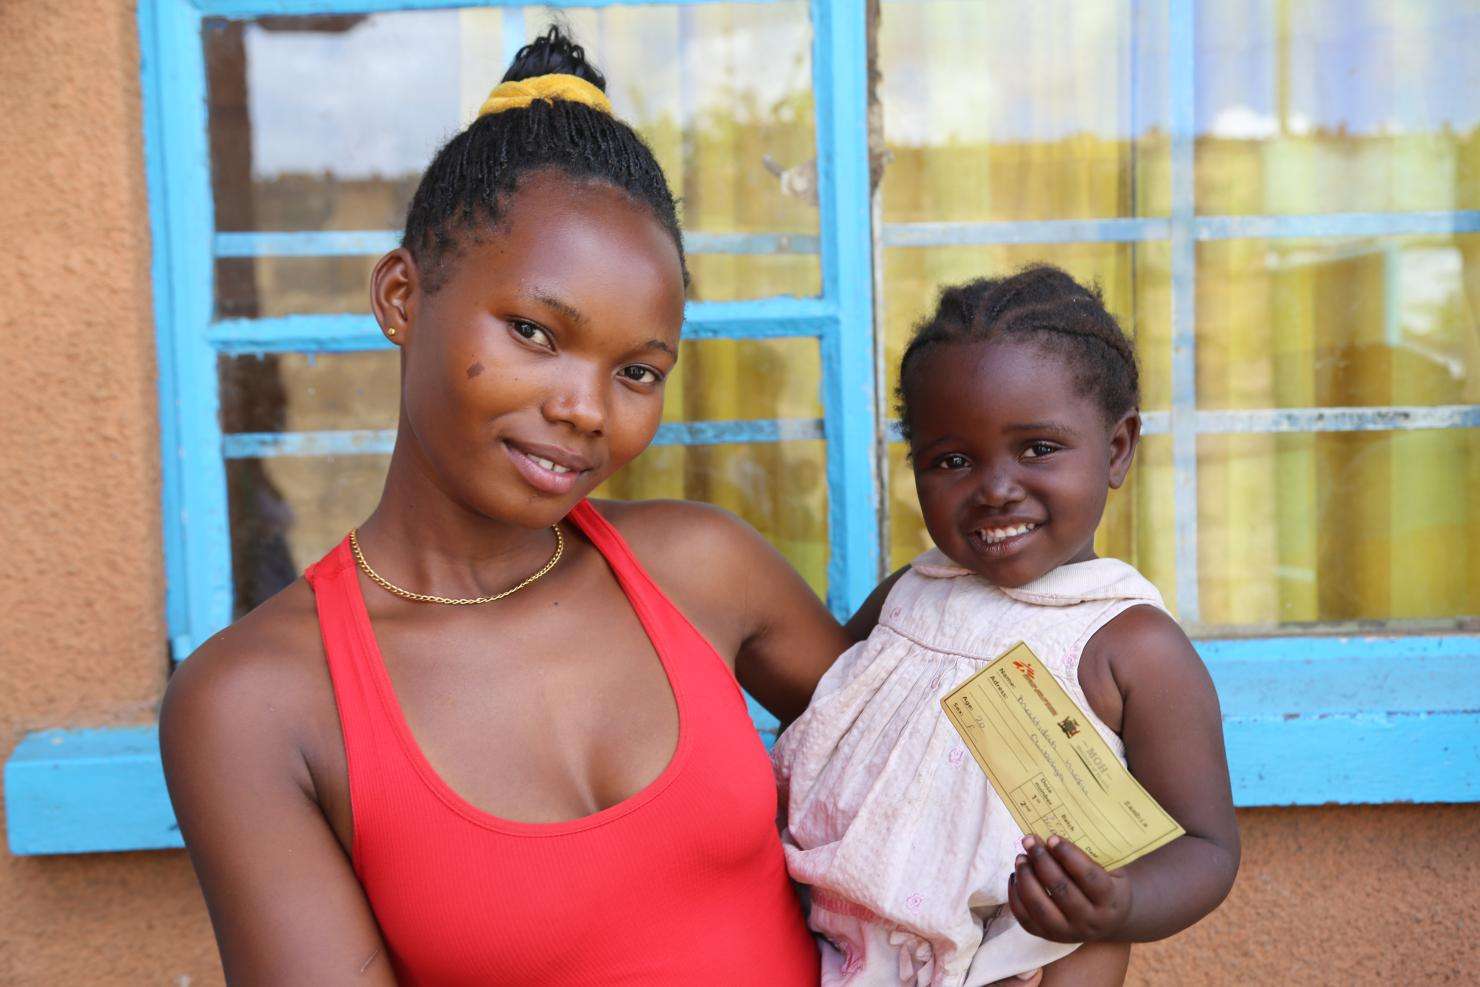 Mathilda and her daughter were among the half million vaccinated against cholera in Lusaka, Zambia.